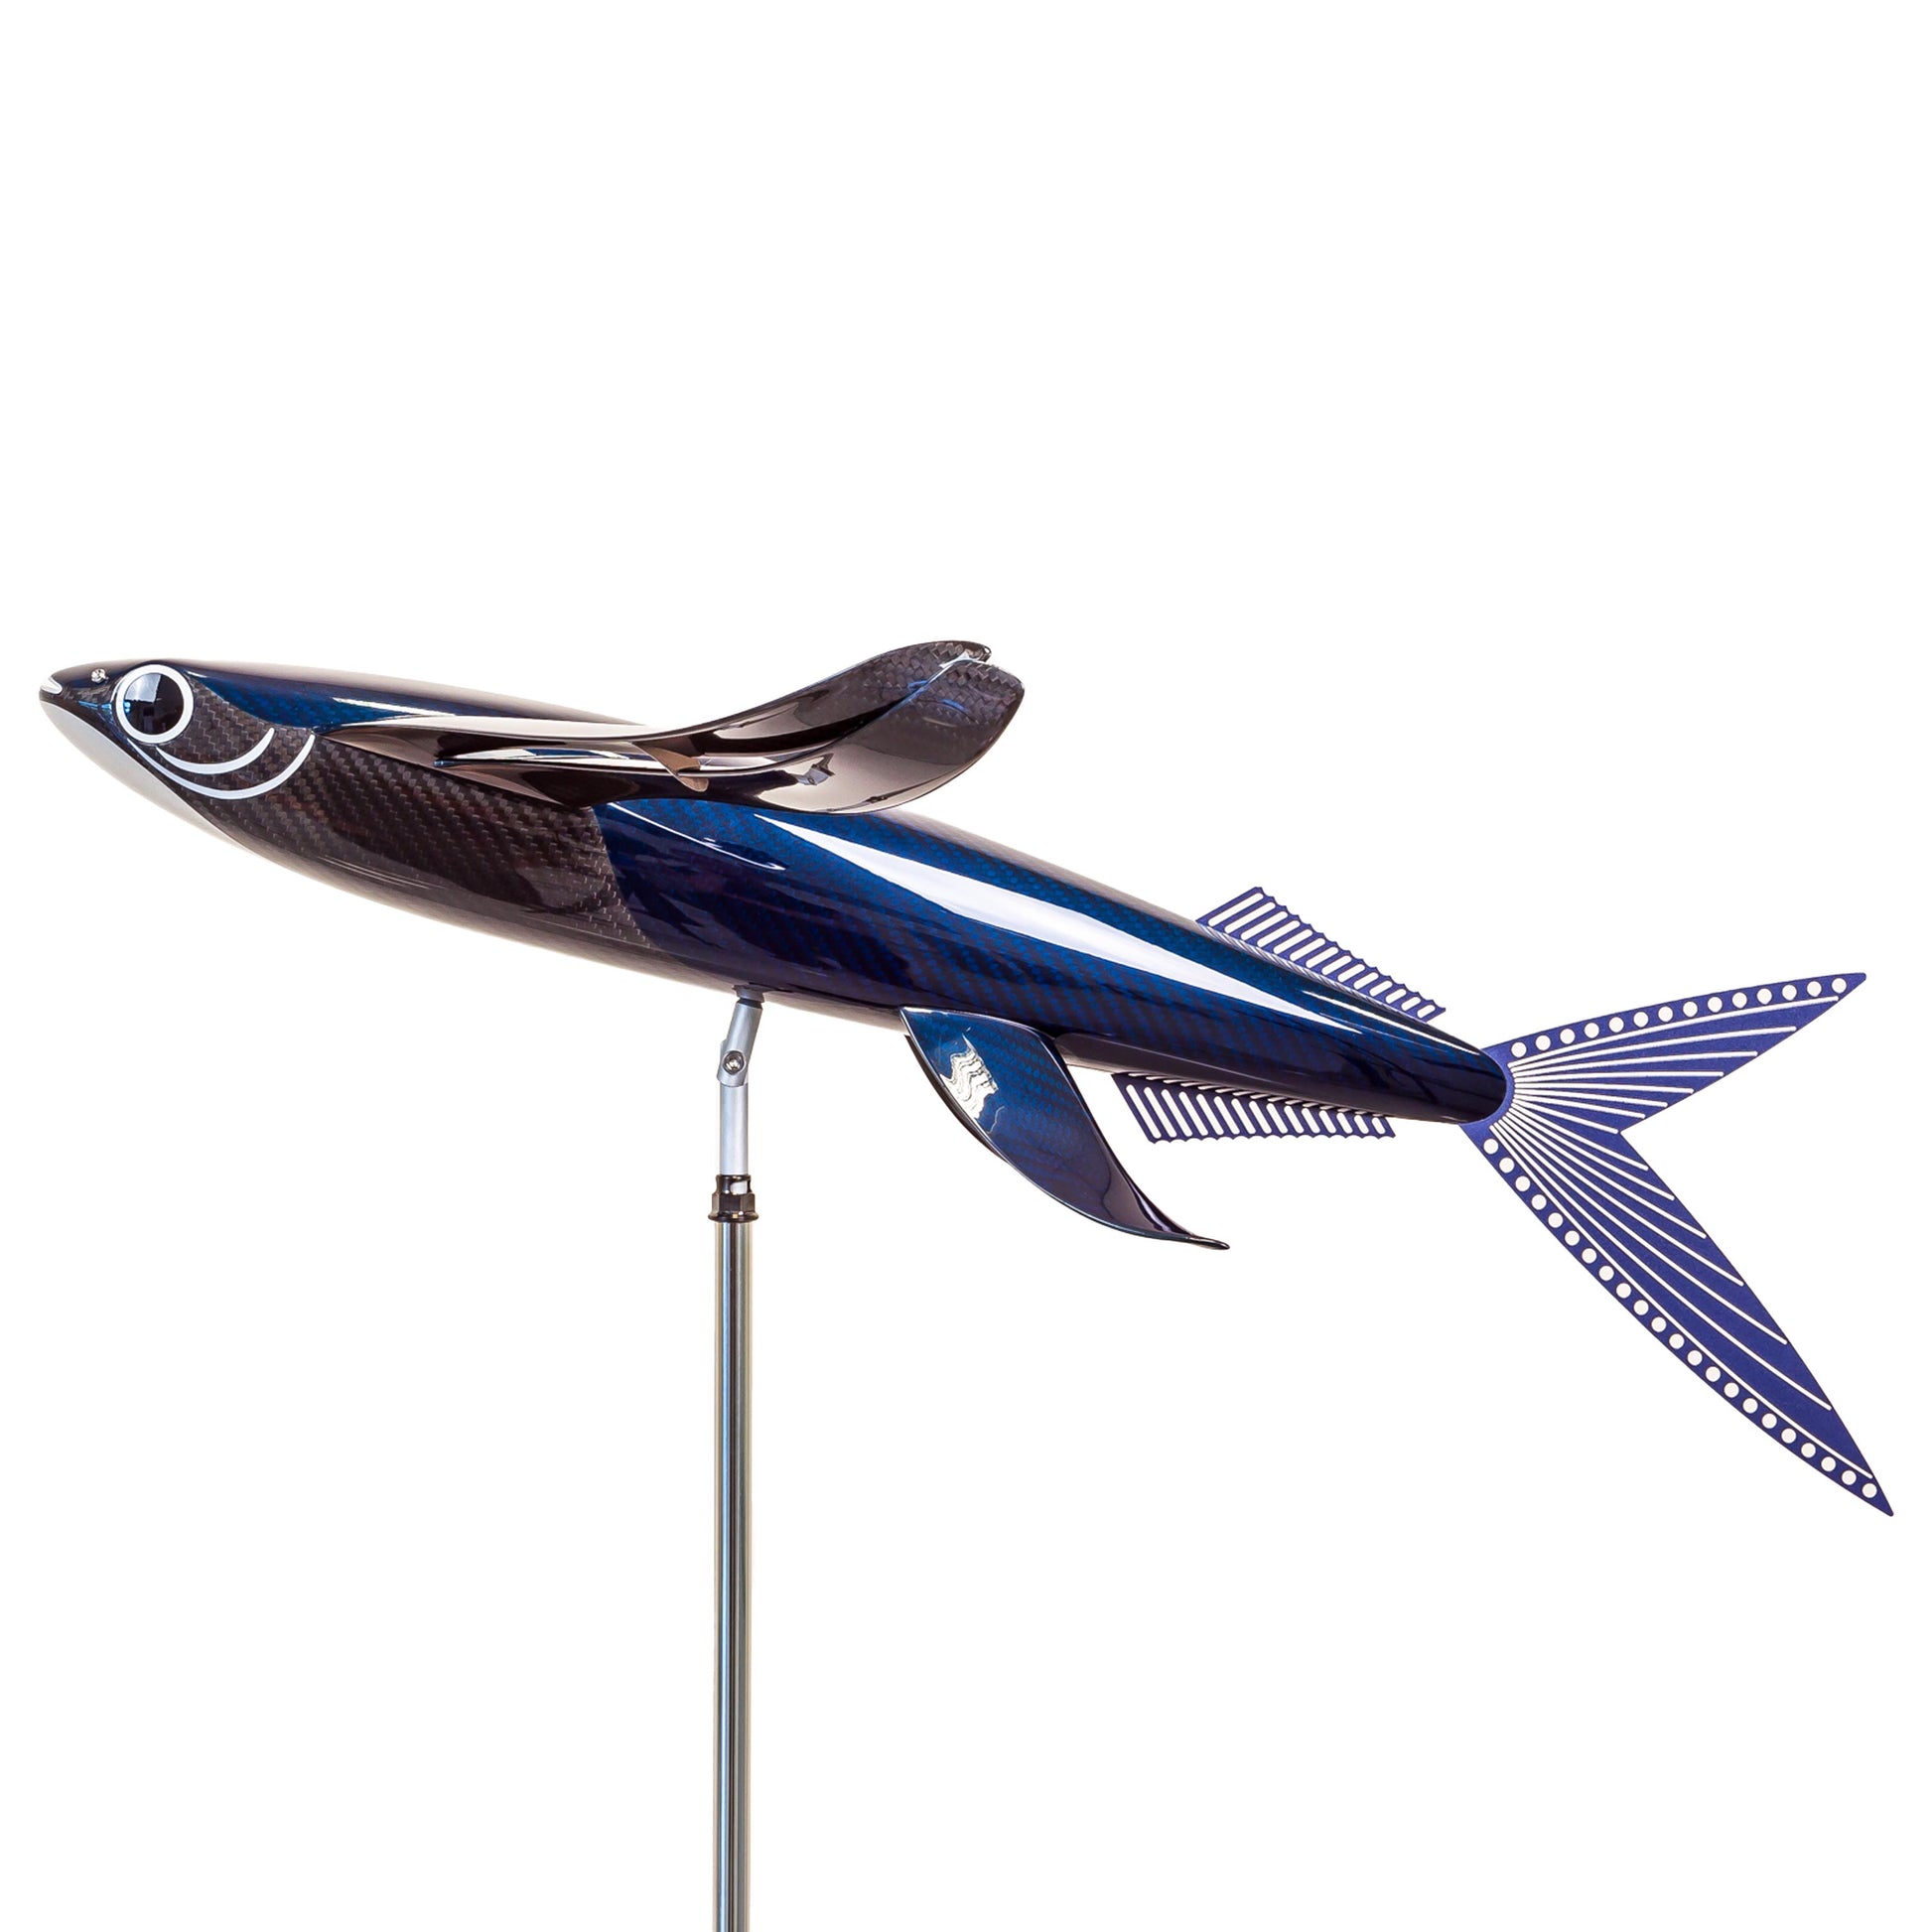 Carbon fibre Flying Fish sculpture with blue tint